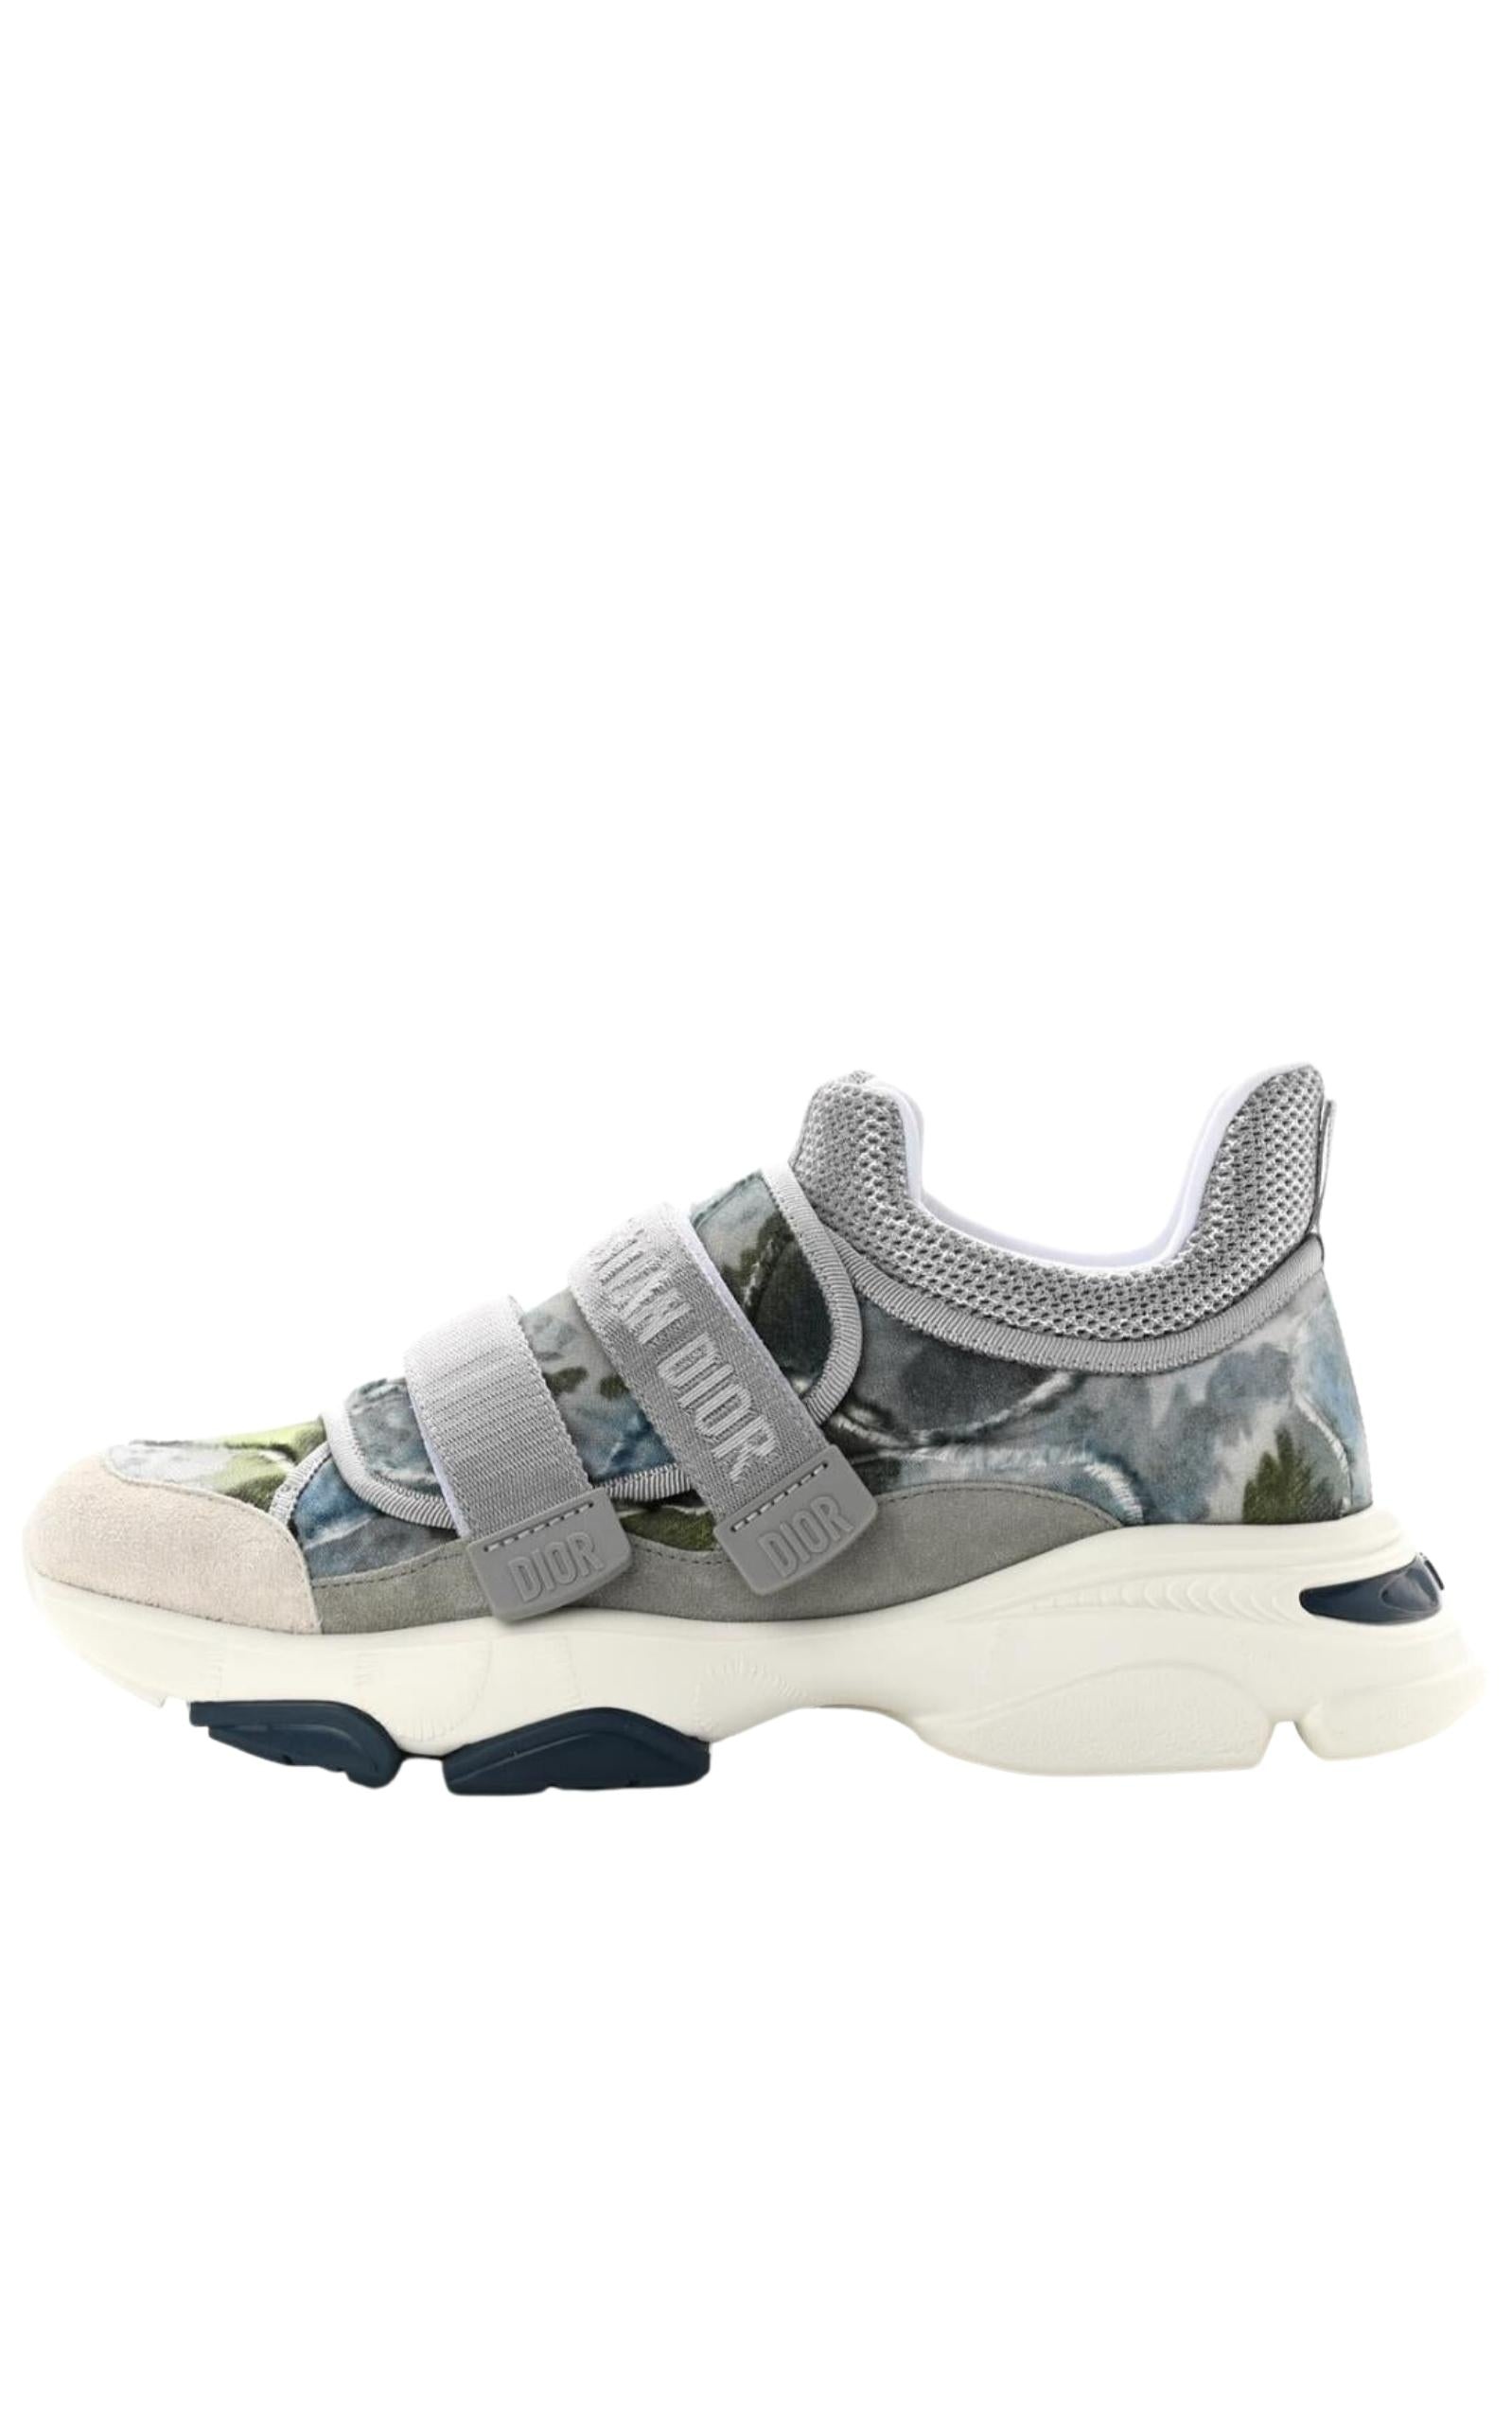 D-Wander Camouflage Techno Fabric Sneakers - 5